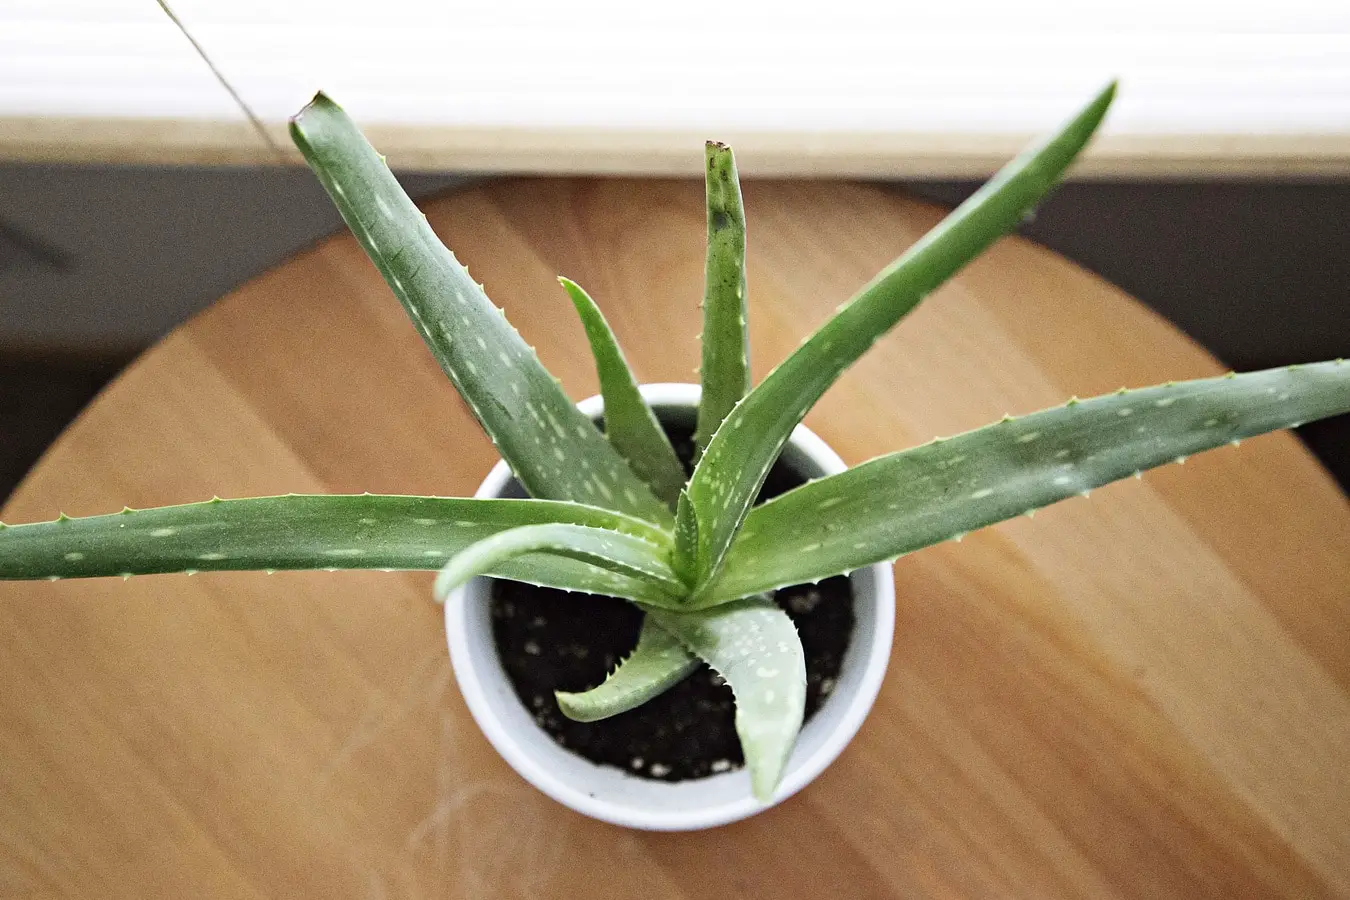 How should the irrigation of Aloe vera be?